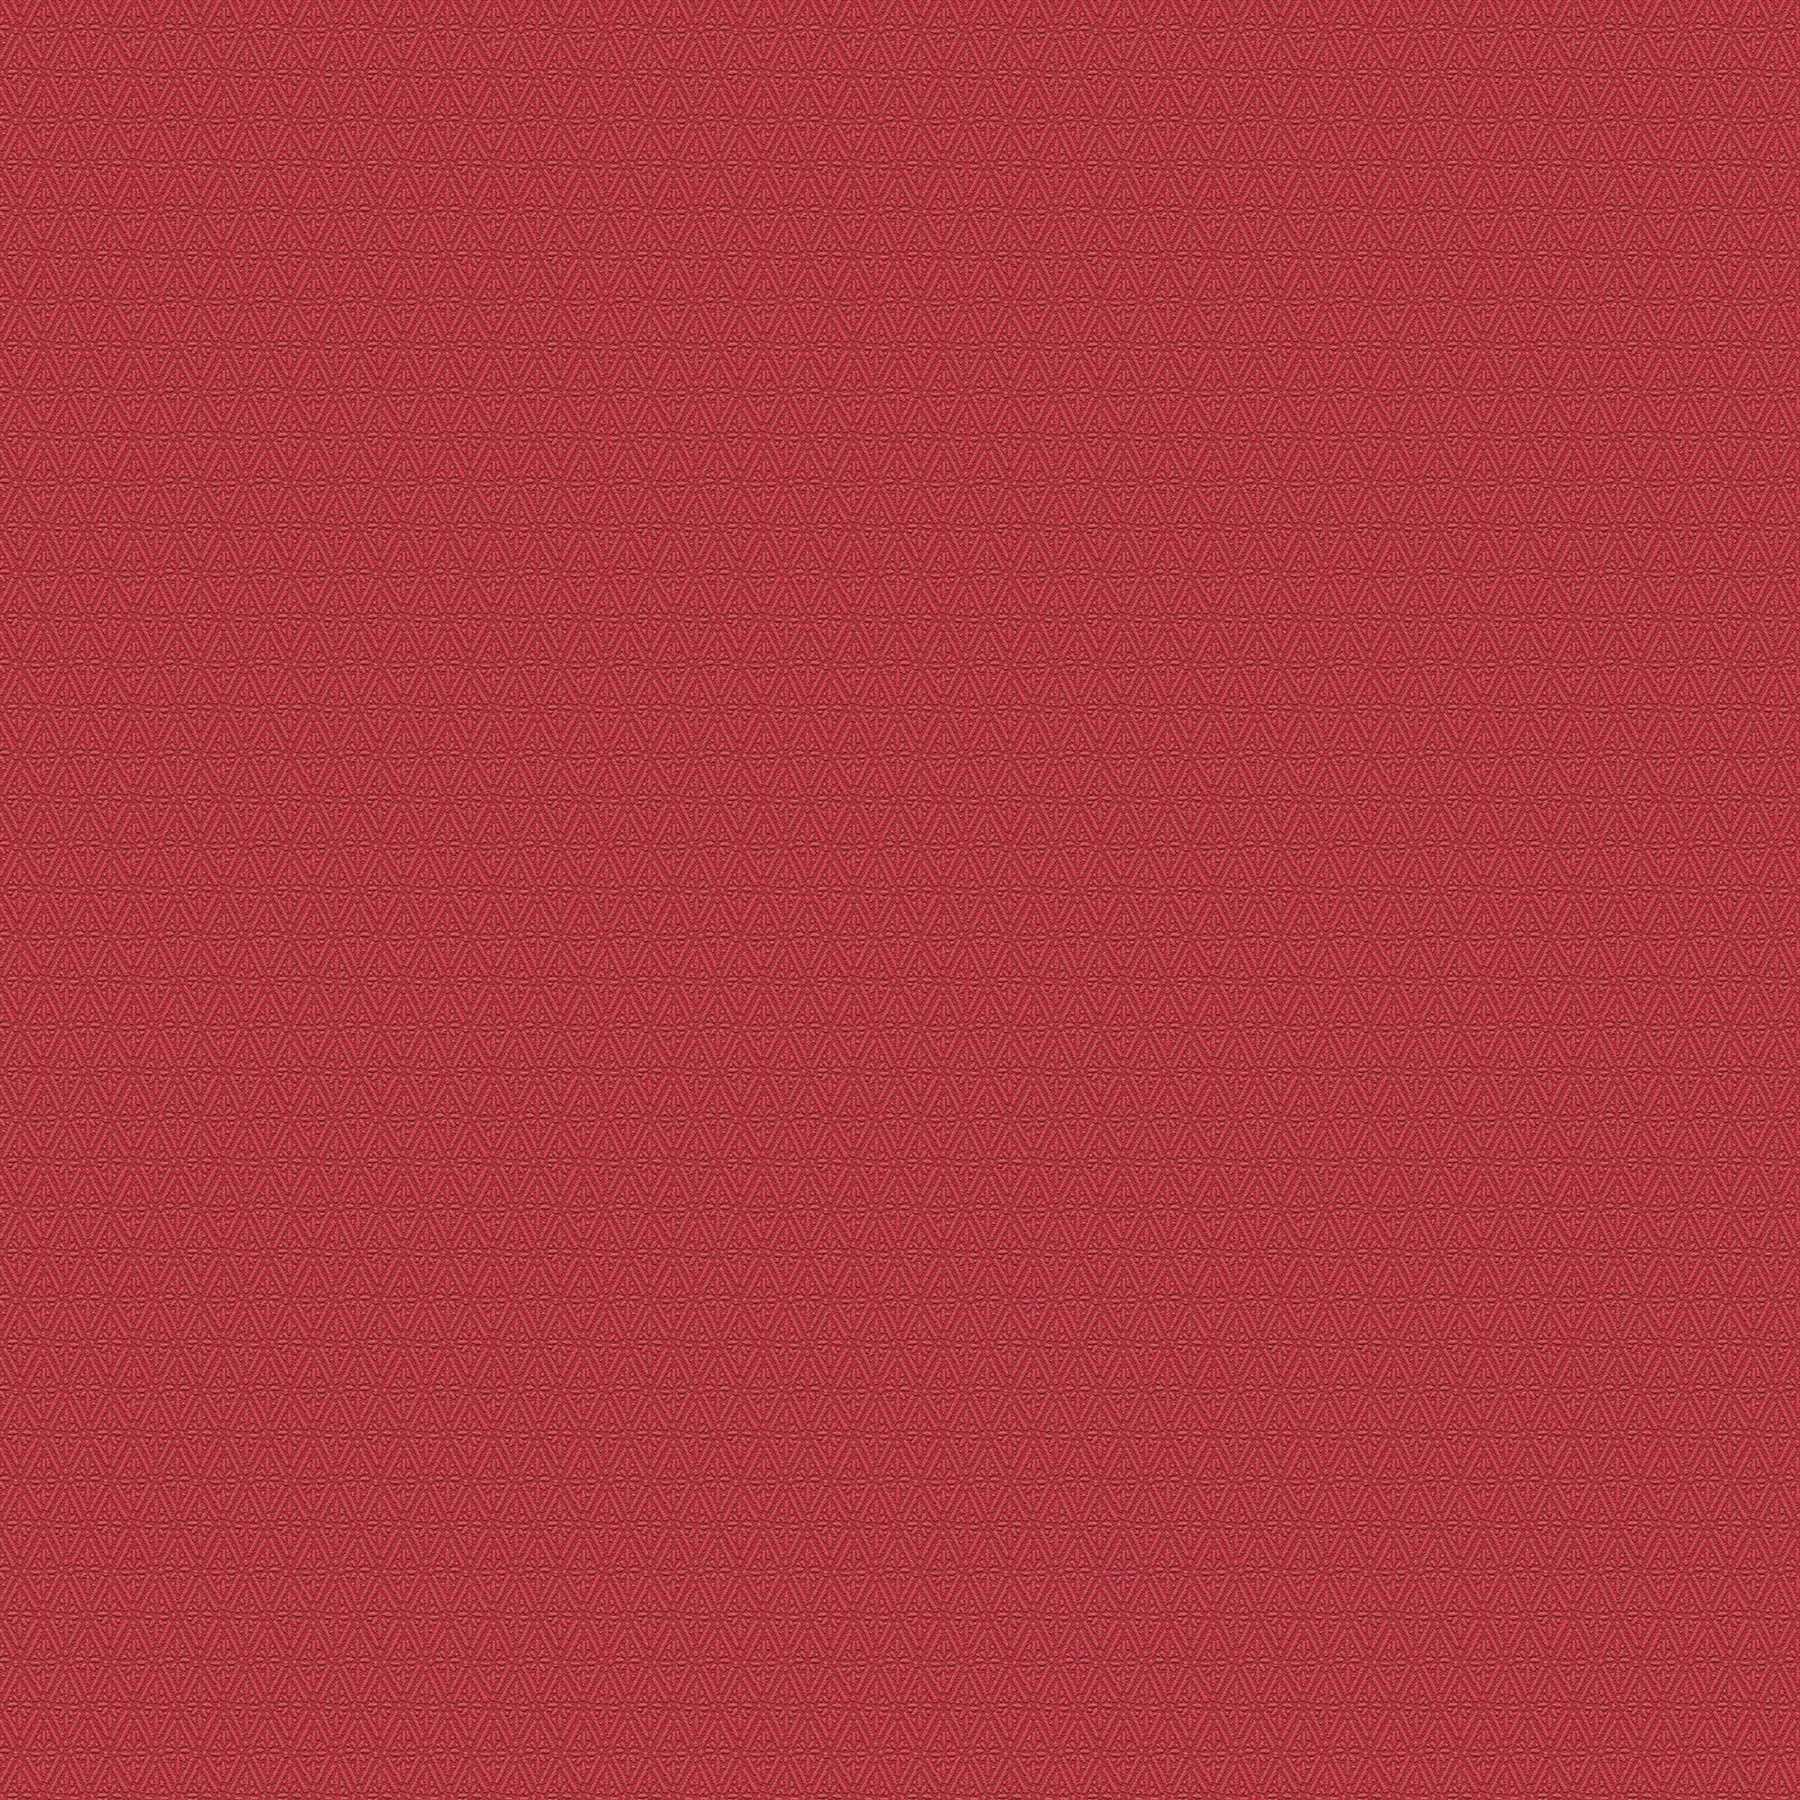 Plain wallpaper with structure pattern in diamond design - red
